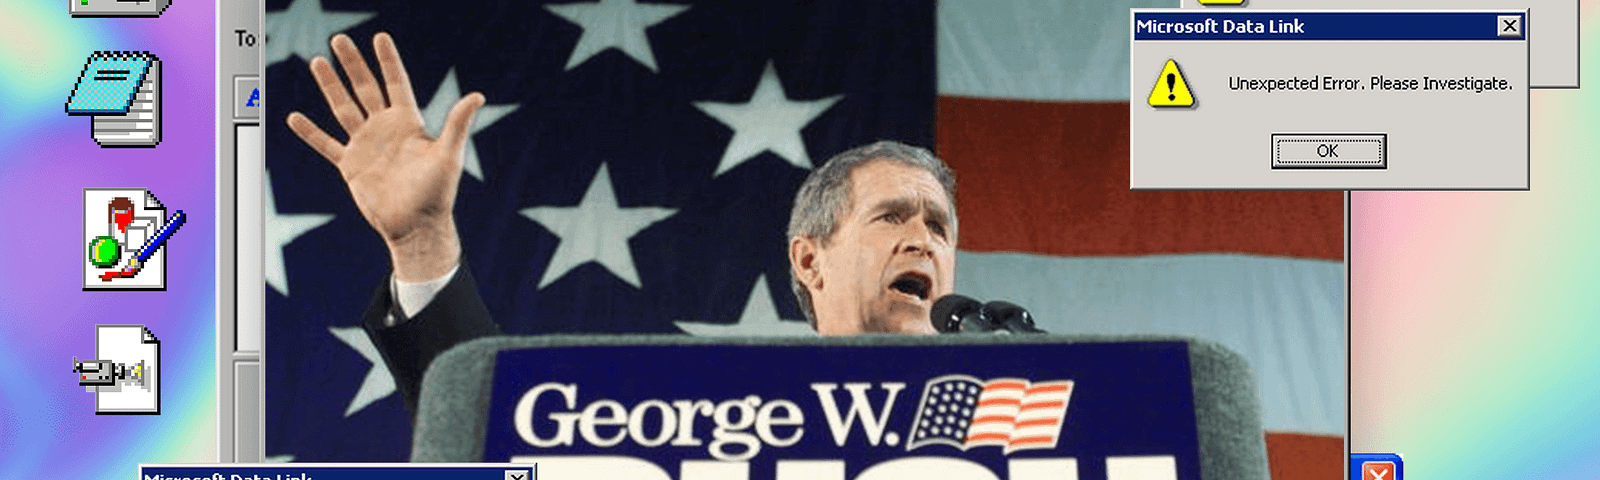 George Bush for President image with error messages on a Windows 95 desktop.